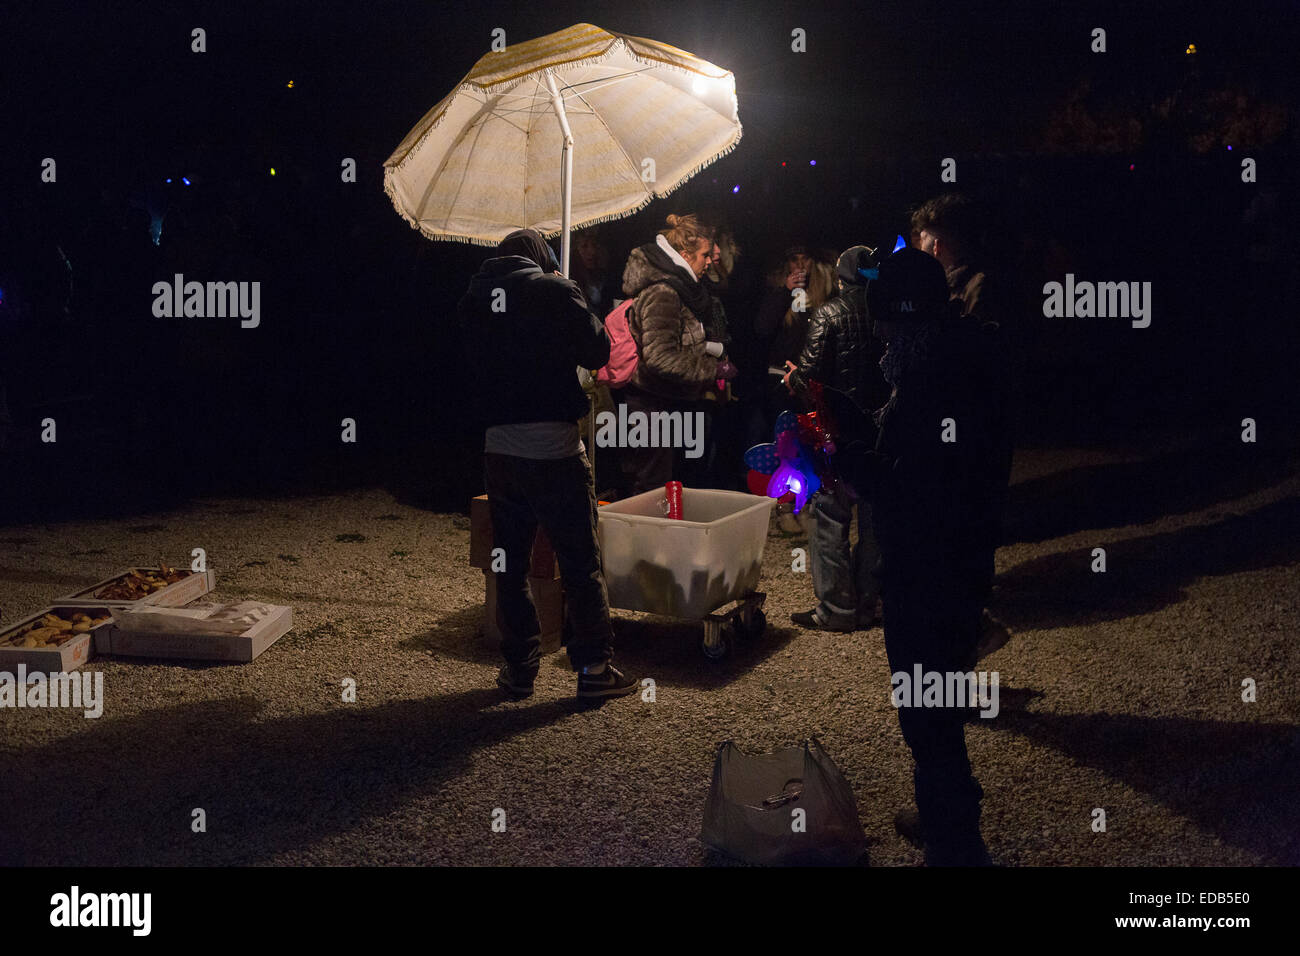 Beer vendor in the night in Circo Massimo, Rome, for New year eve Stock Photo